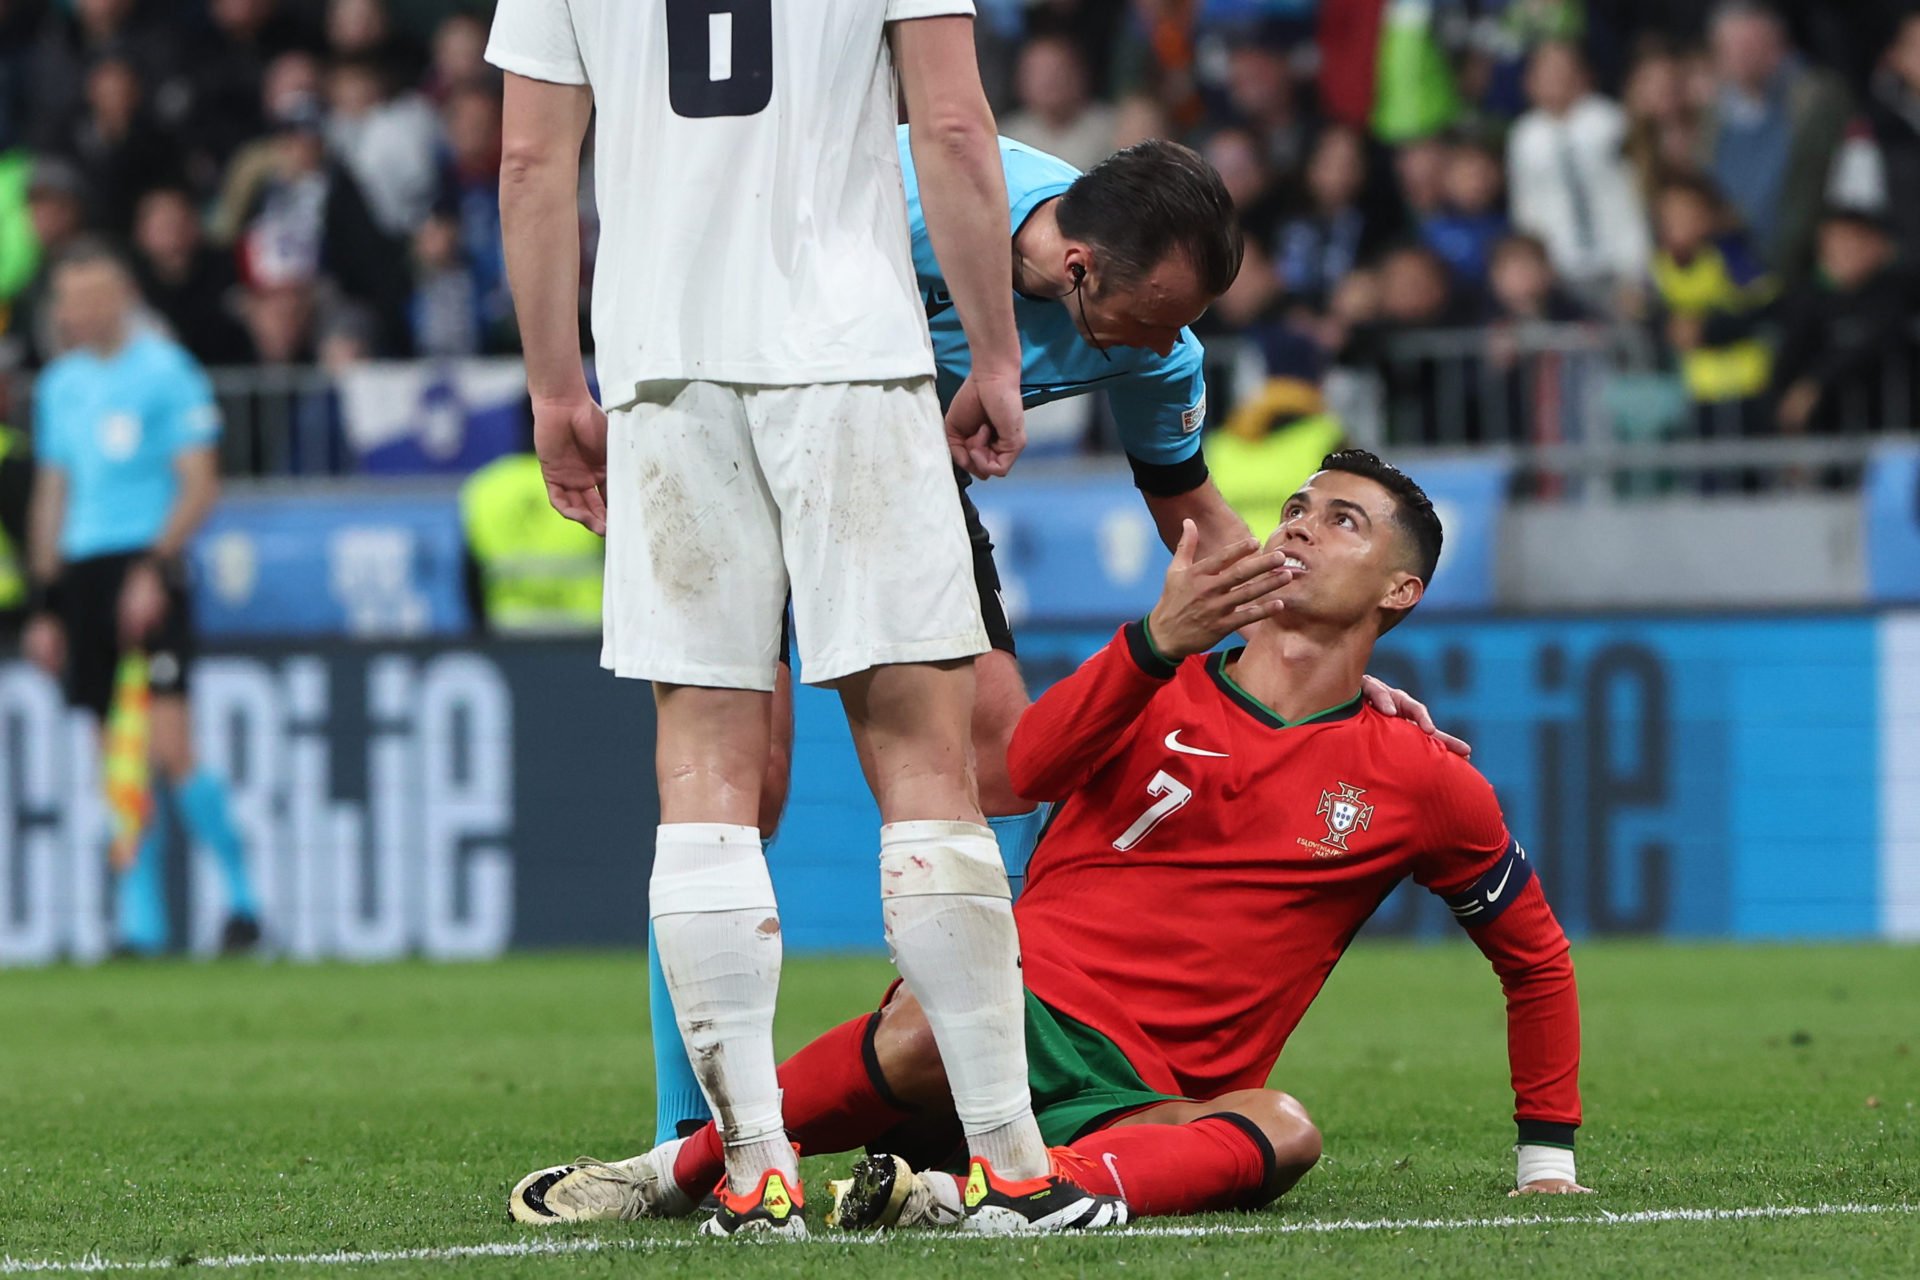 Cristiano Ronaldo’s return can’t save Portugal from defeat without Bruno Fernandes, 11-game win-streak ends